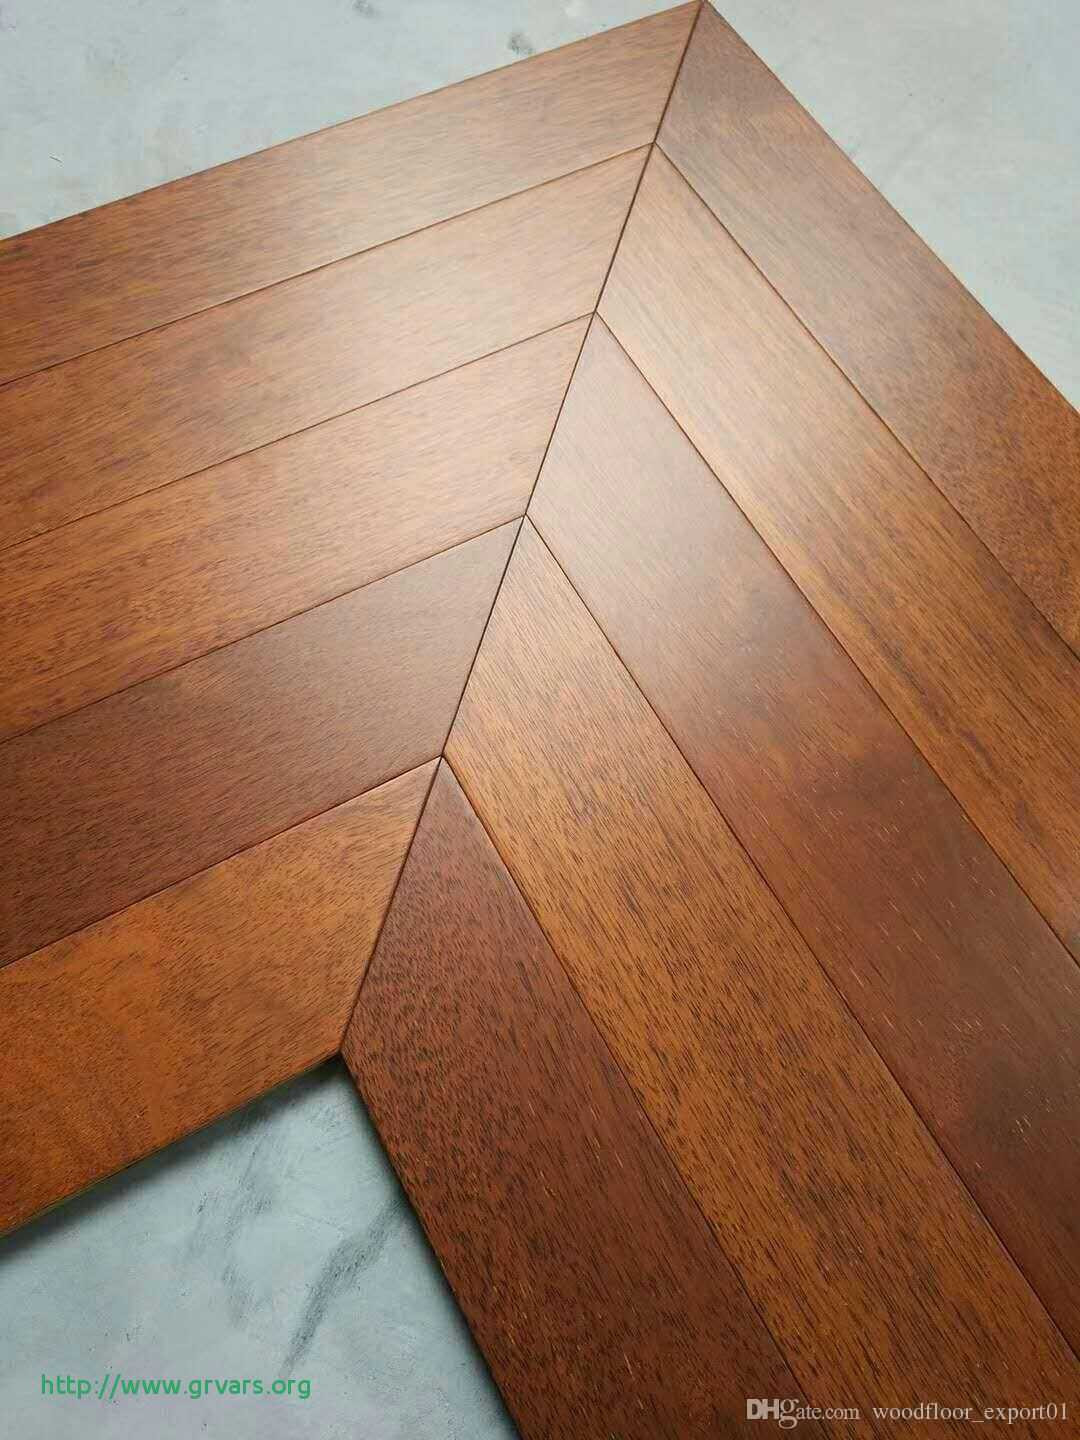 10 Fashionable Hardwood Floors Next to Tile 2022 free download hardwood floors next to tile of elite flooring and design meilleur de where to buy hardwood flooring pertaining to elite flooring and design meilleur de where to buy hardwood flooring inspir